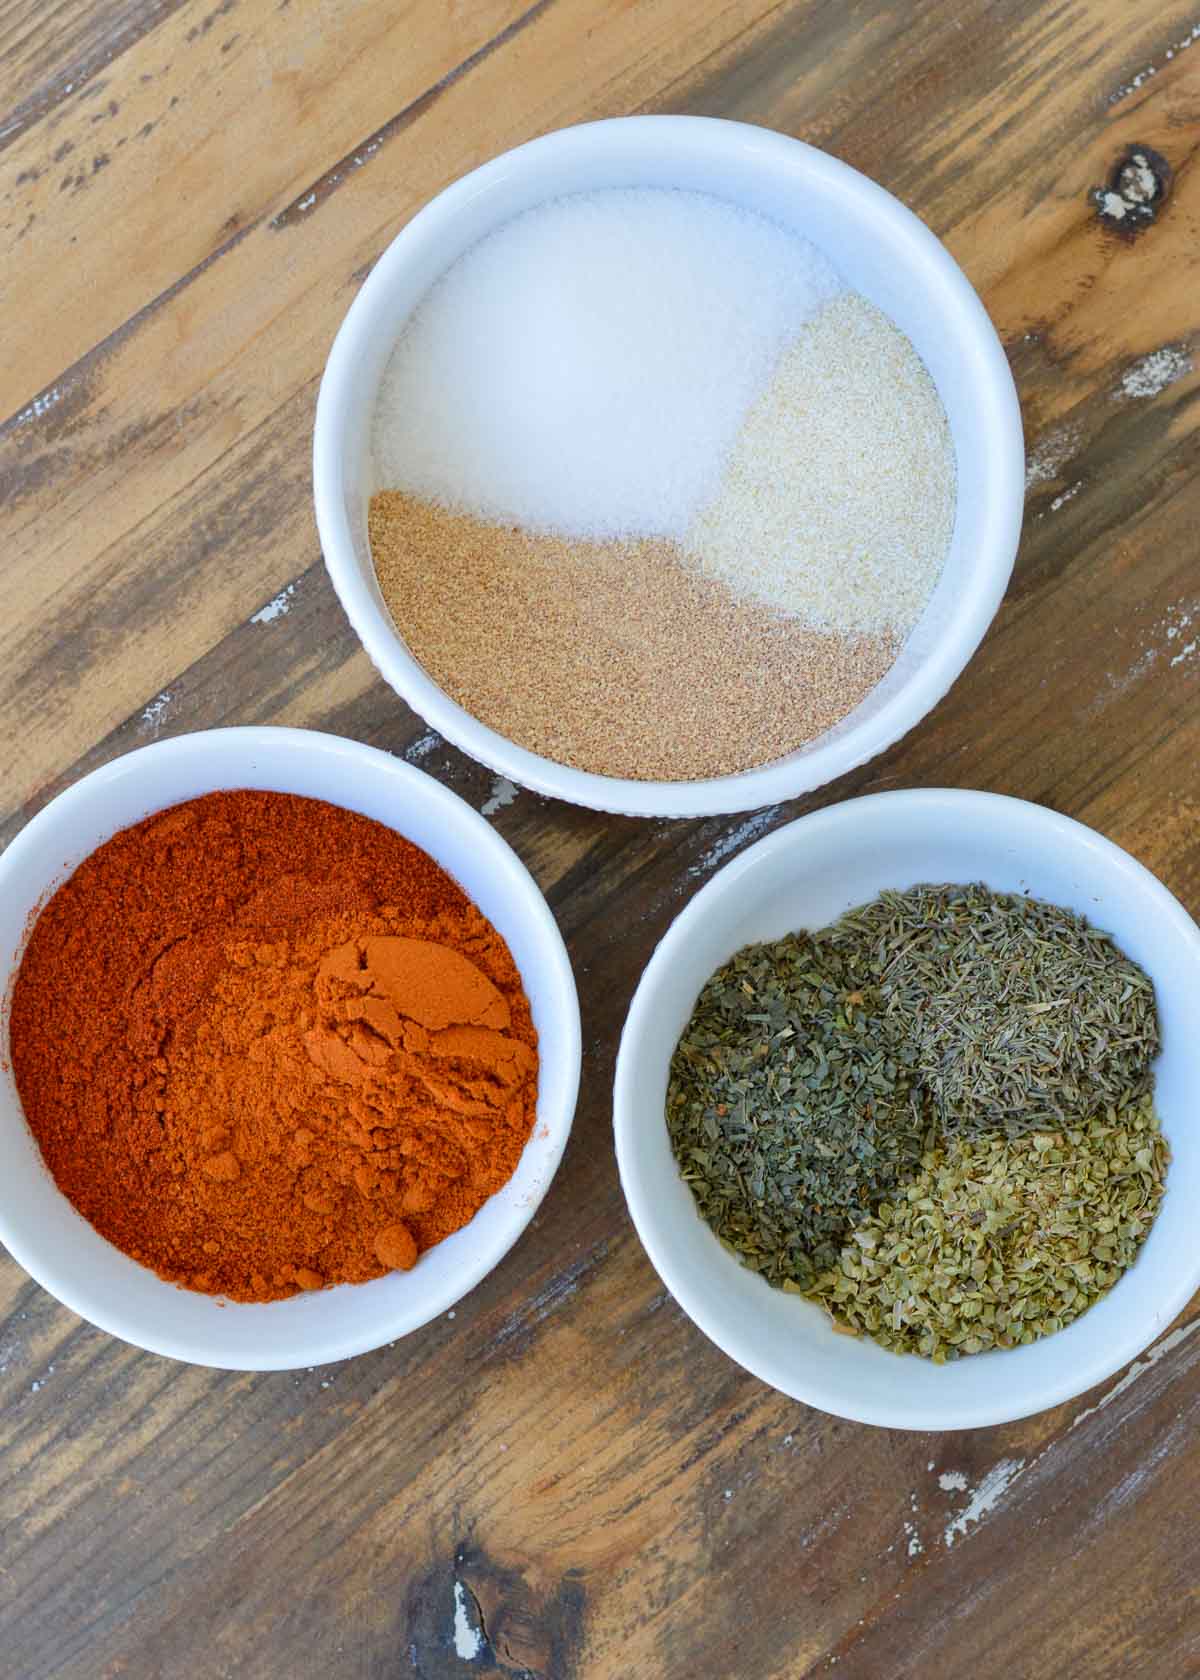 This delicious Homemade Cajun Seasoning Recipe will add the perfect kick to your meals. Achieve spicy or mild Cajun flavor perfect for meat, vegetables, pasta, soups, and more!